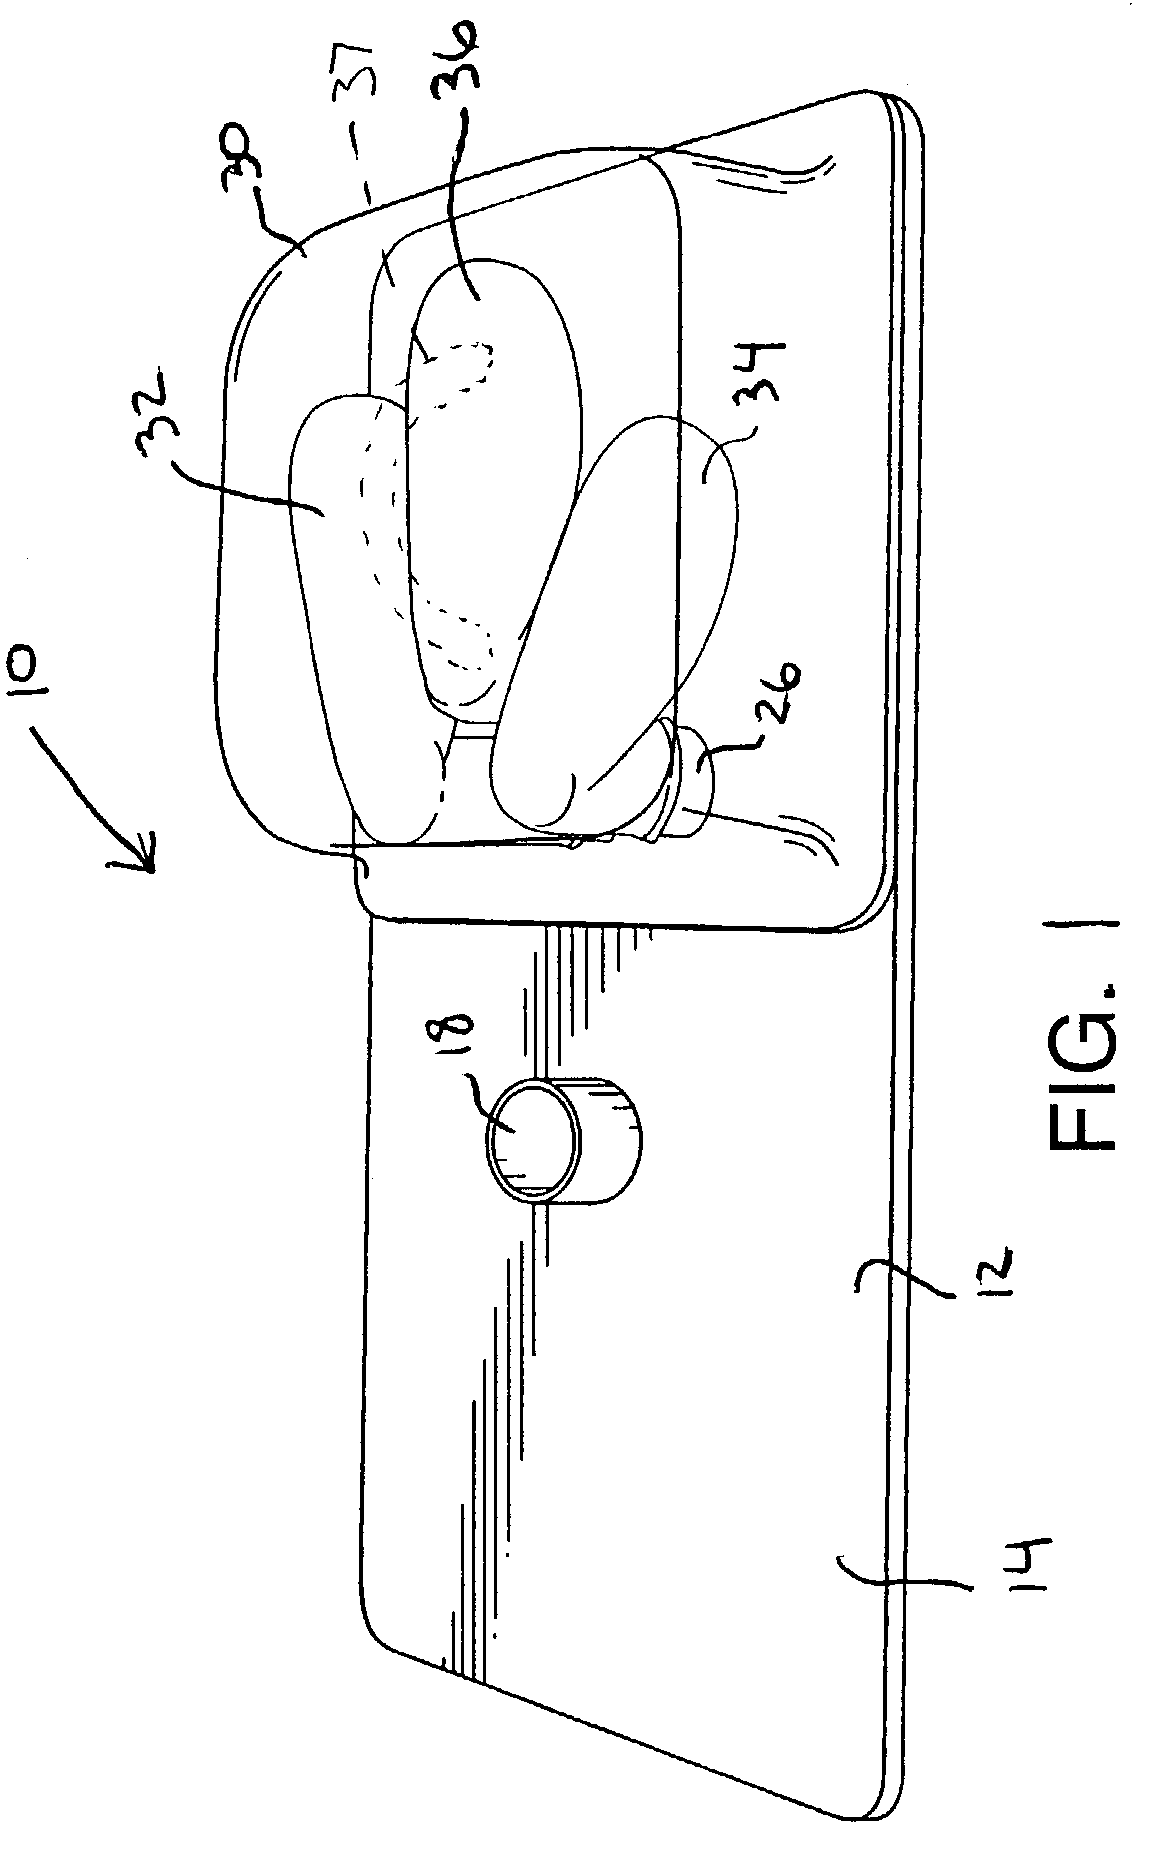 CPR demonstration device and methods